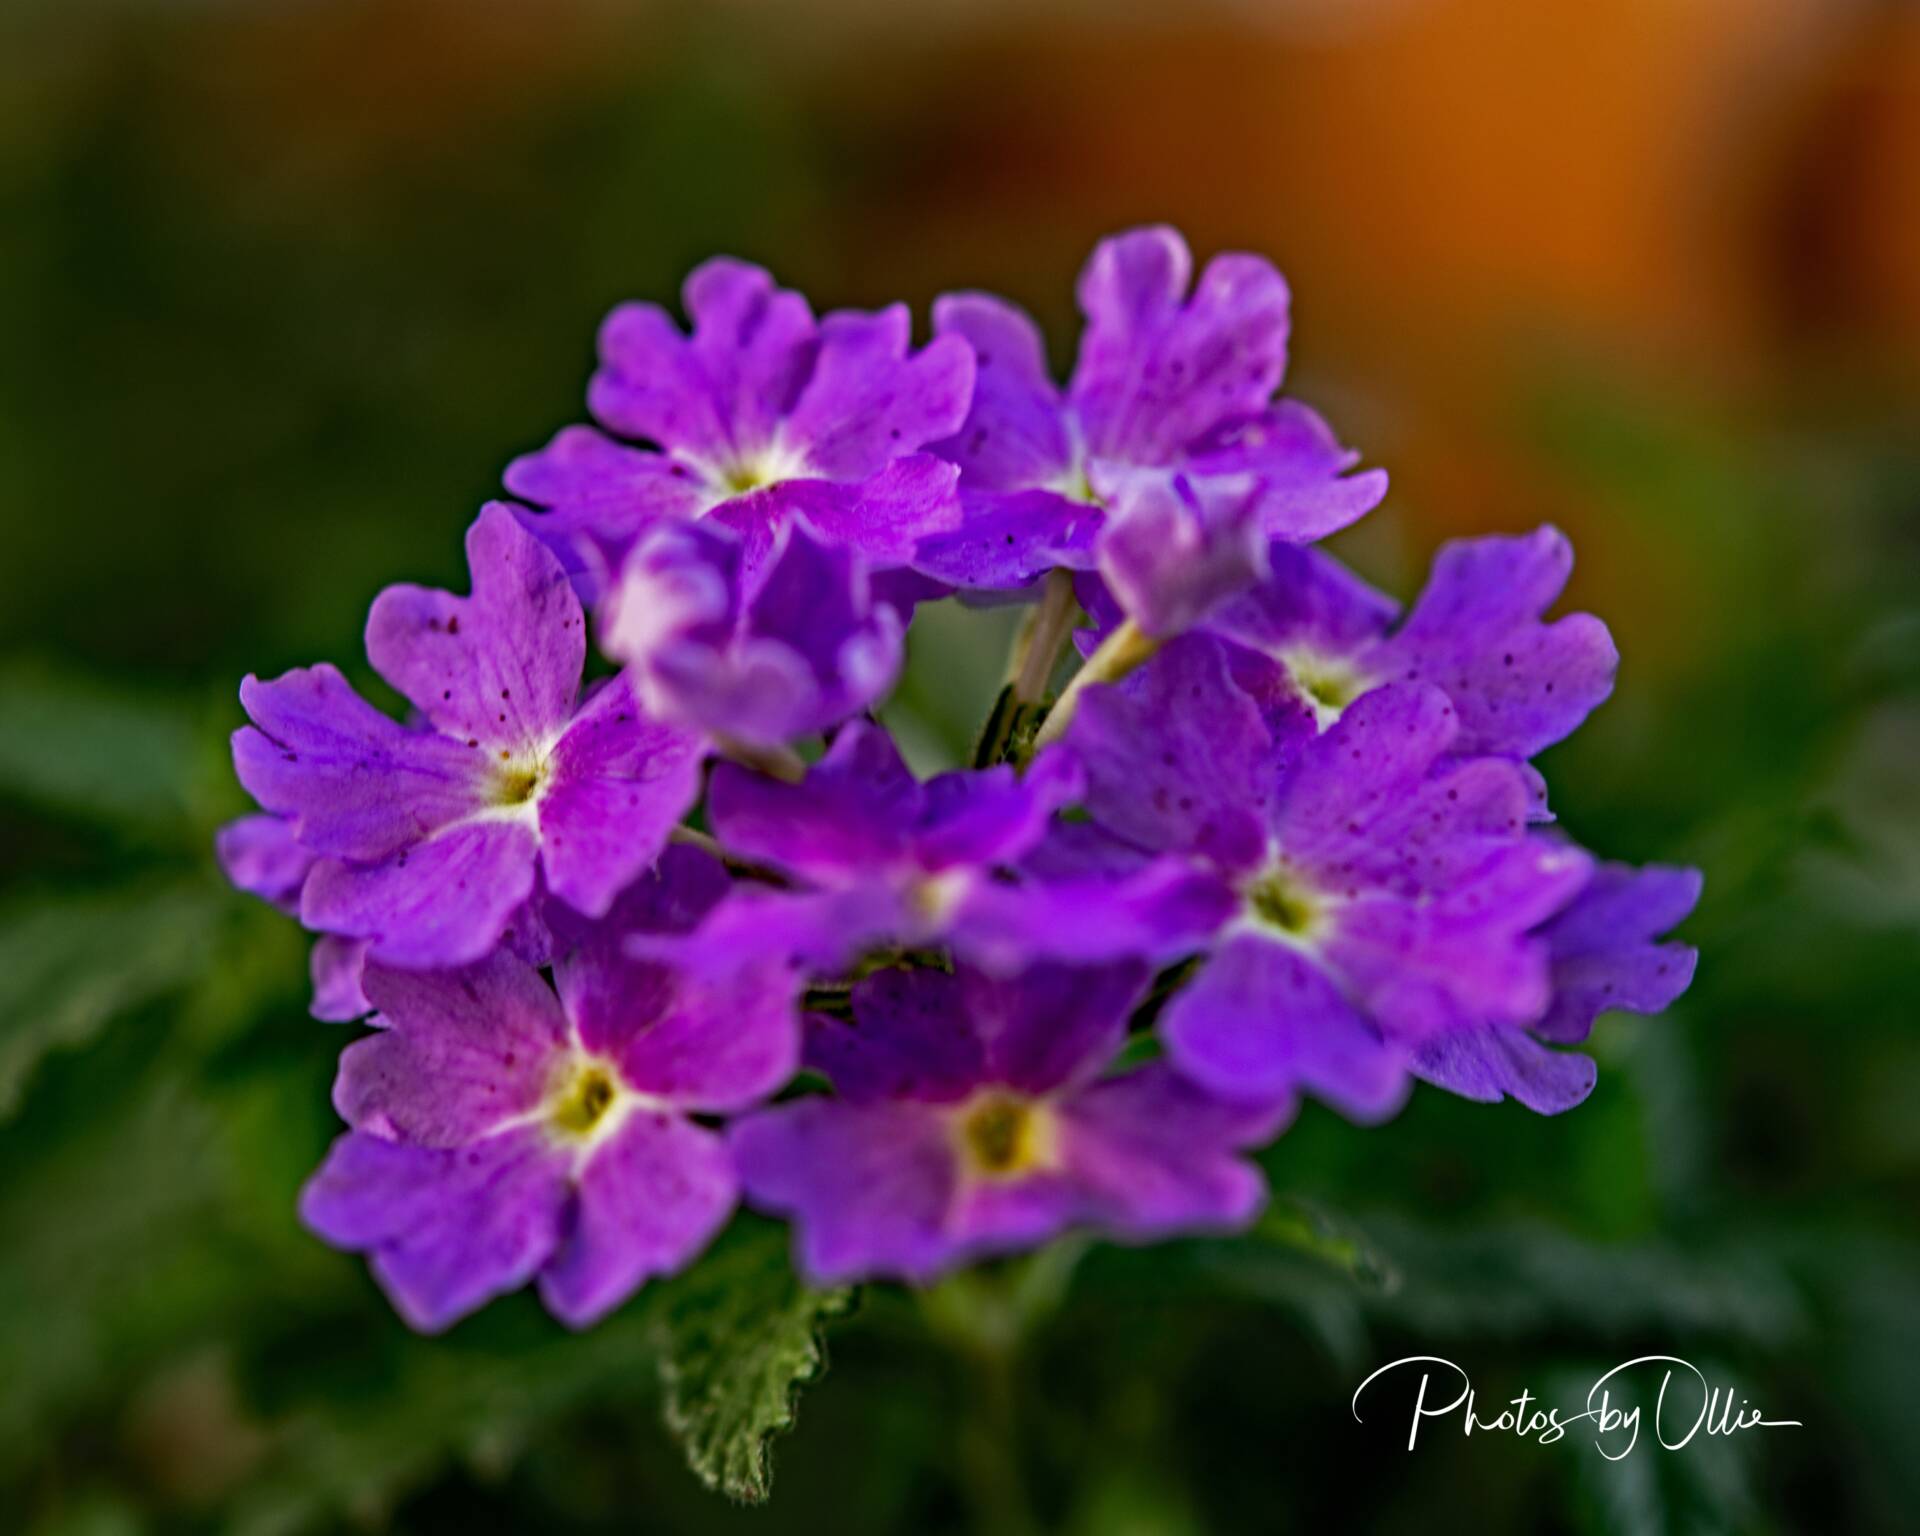 photosbyollie-Flowers-in-middle-box-Sept-2020-1